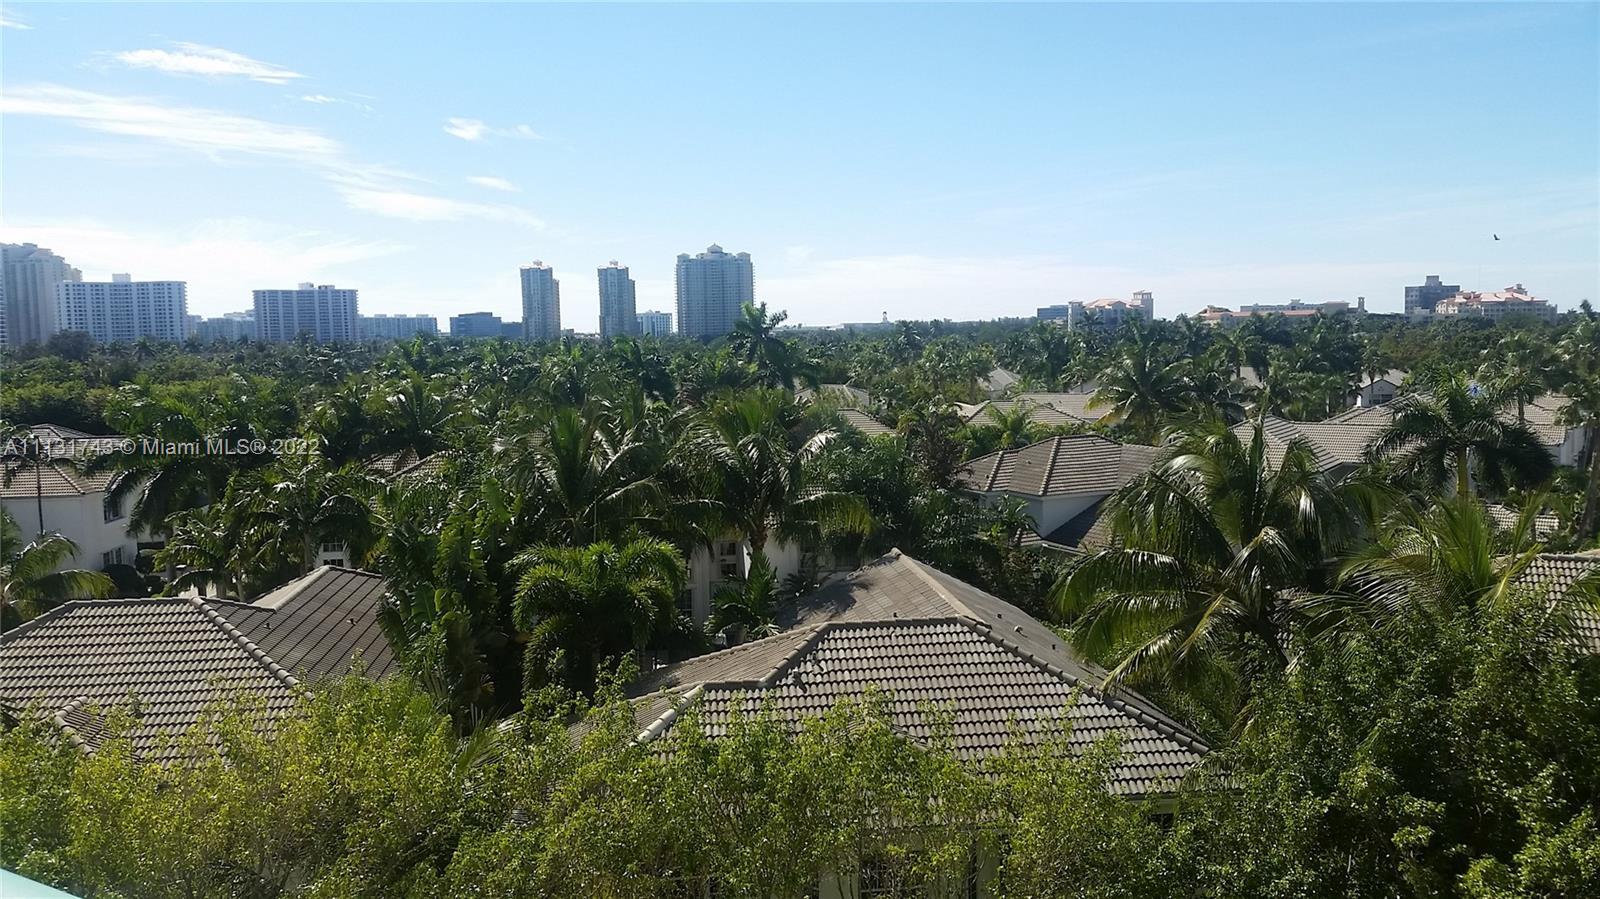 UNIT IS VACANT. SPECTACULAR 3 BED / 3 BATH UNIT IN THE HEART OF AVENTURA. BEAUTIFUL TURNBERRY GOLF V